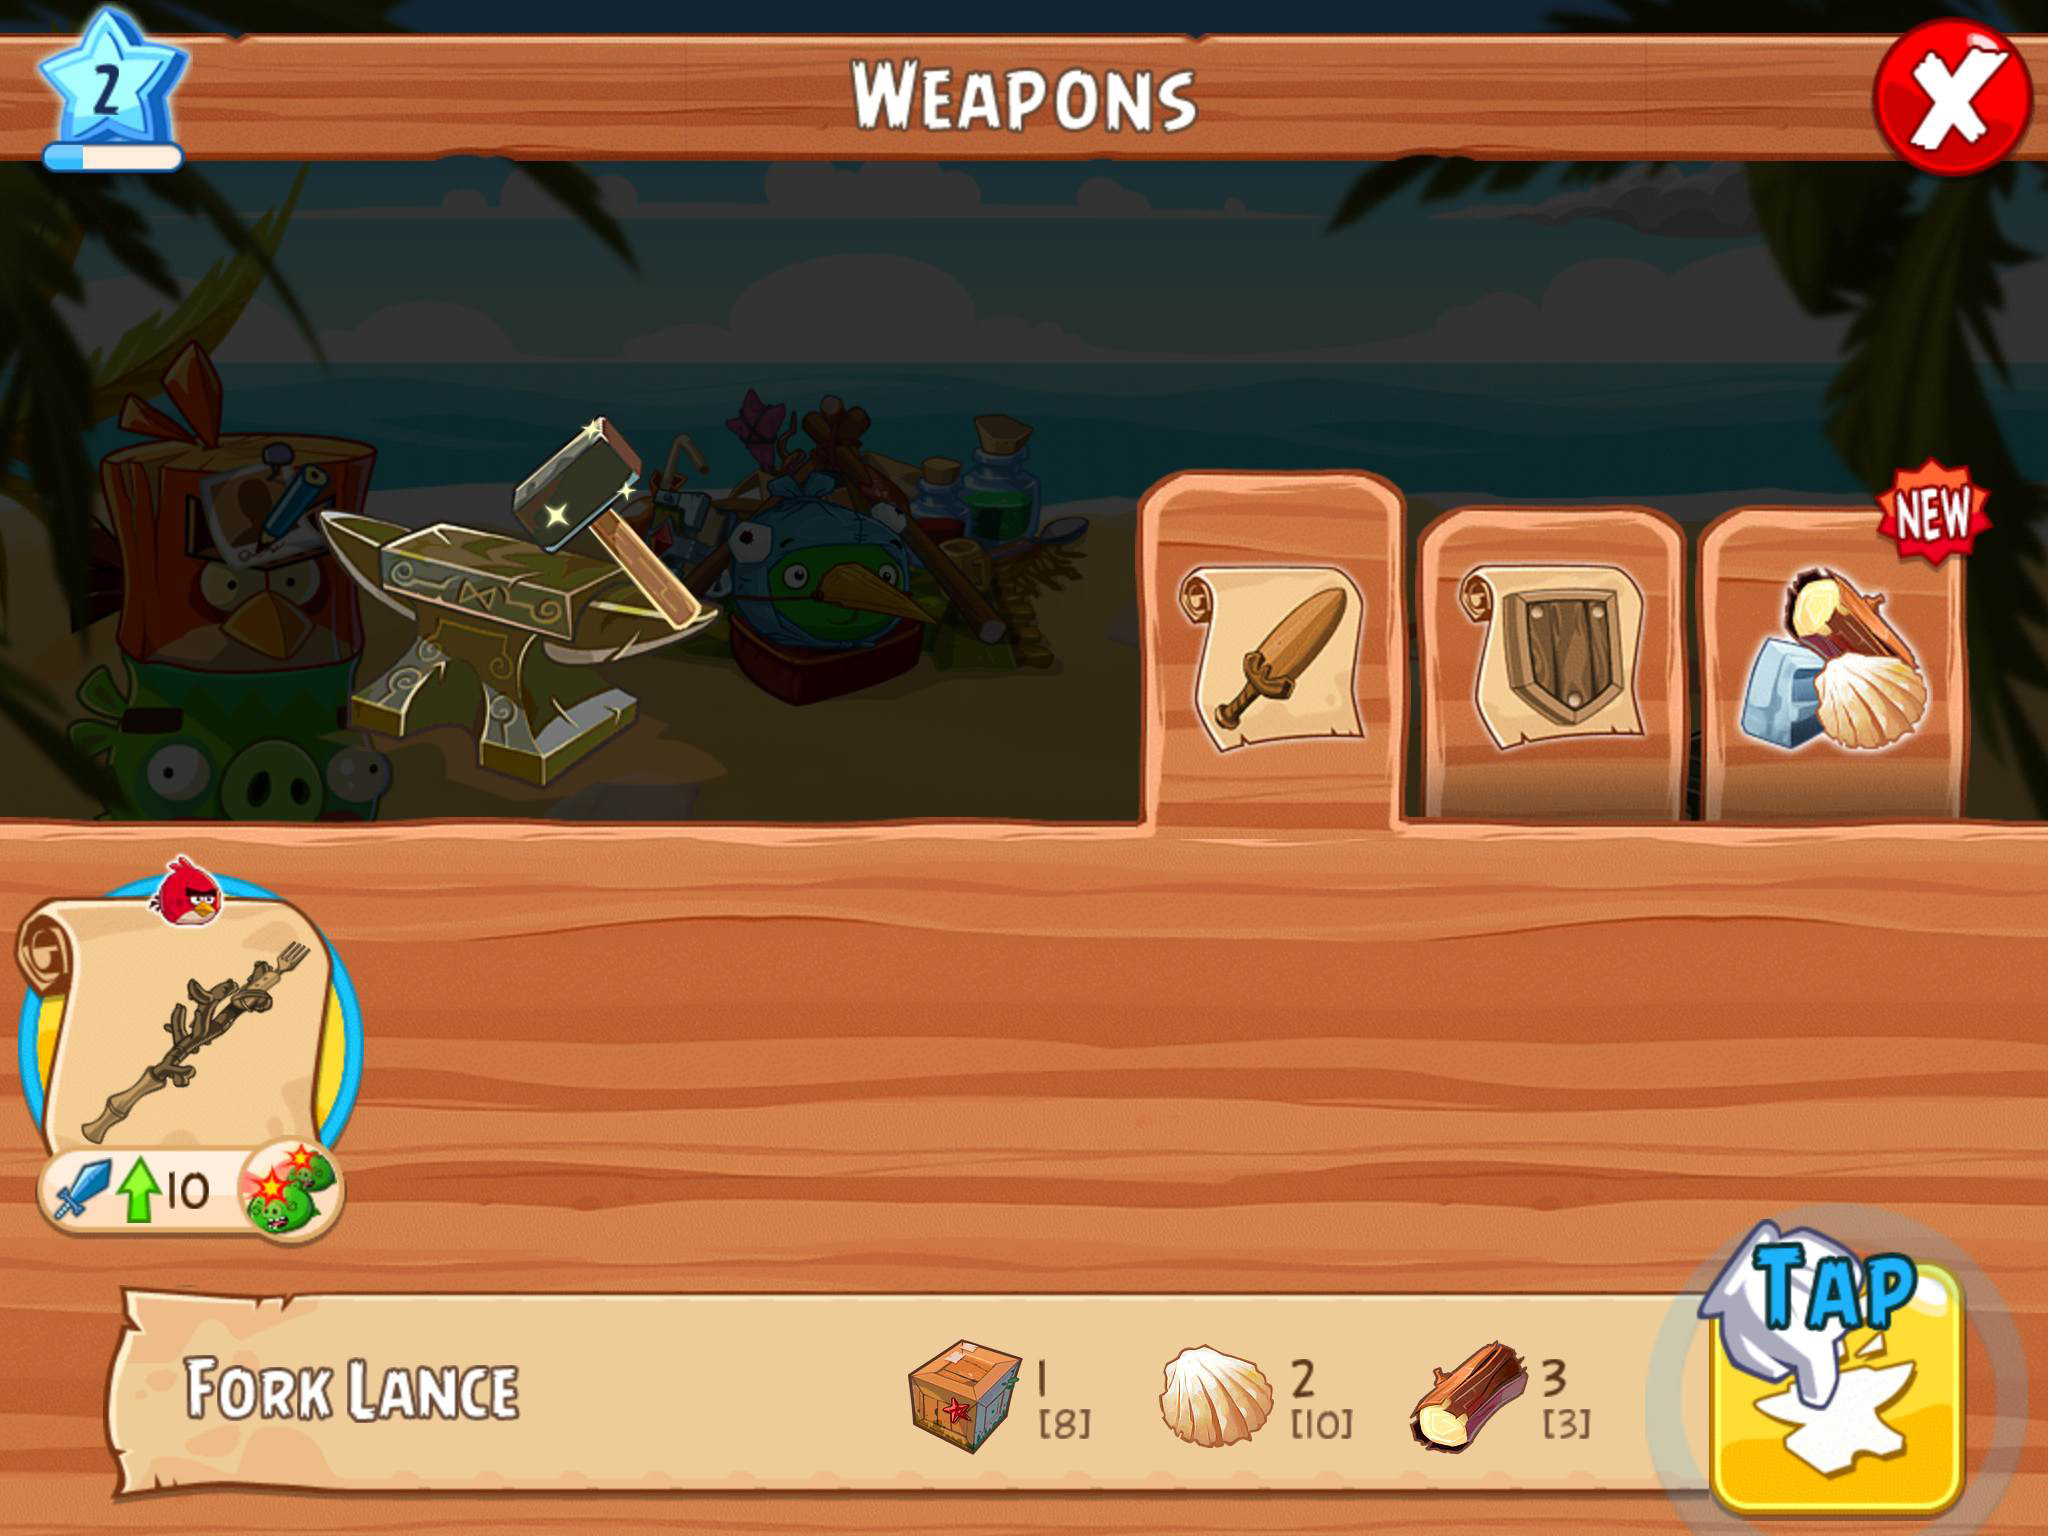 Angry Birds Epic Is a Turn-Based  RPG?